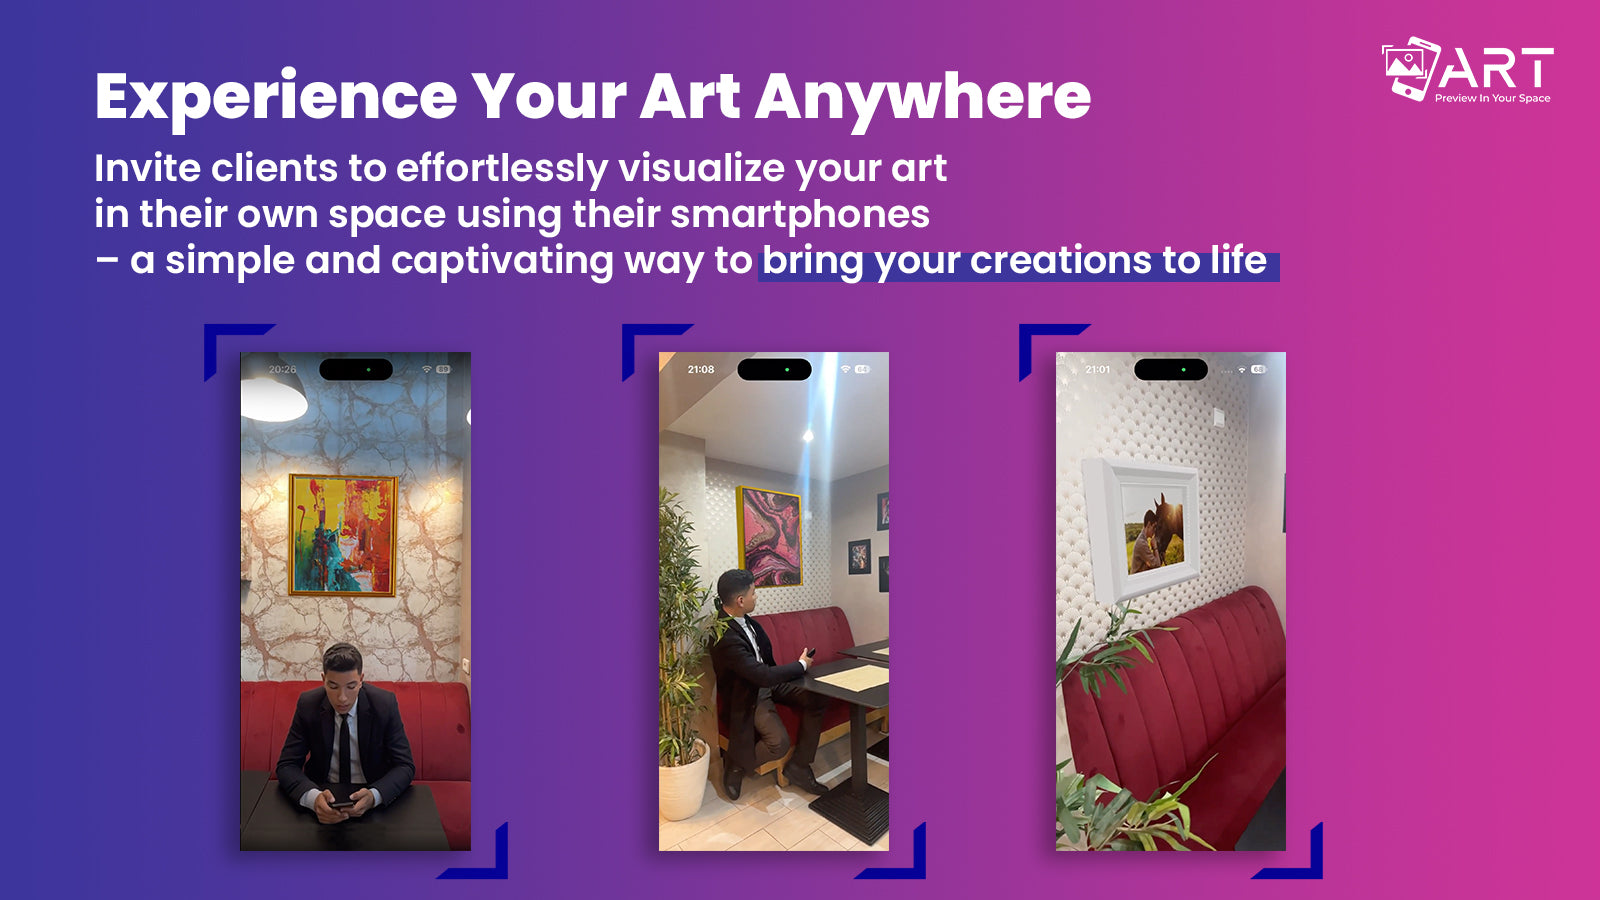 ART AR: Preview In Your Space Screenshot